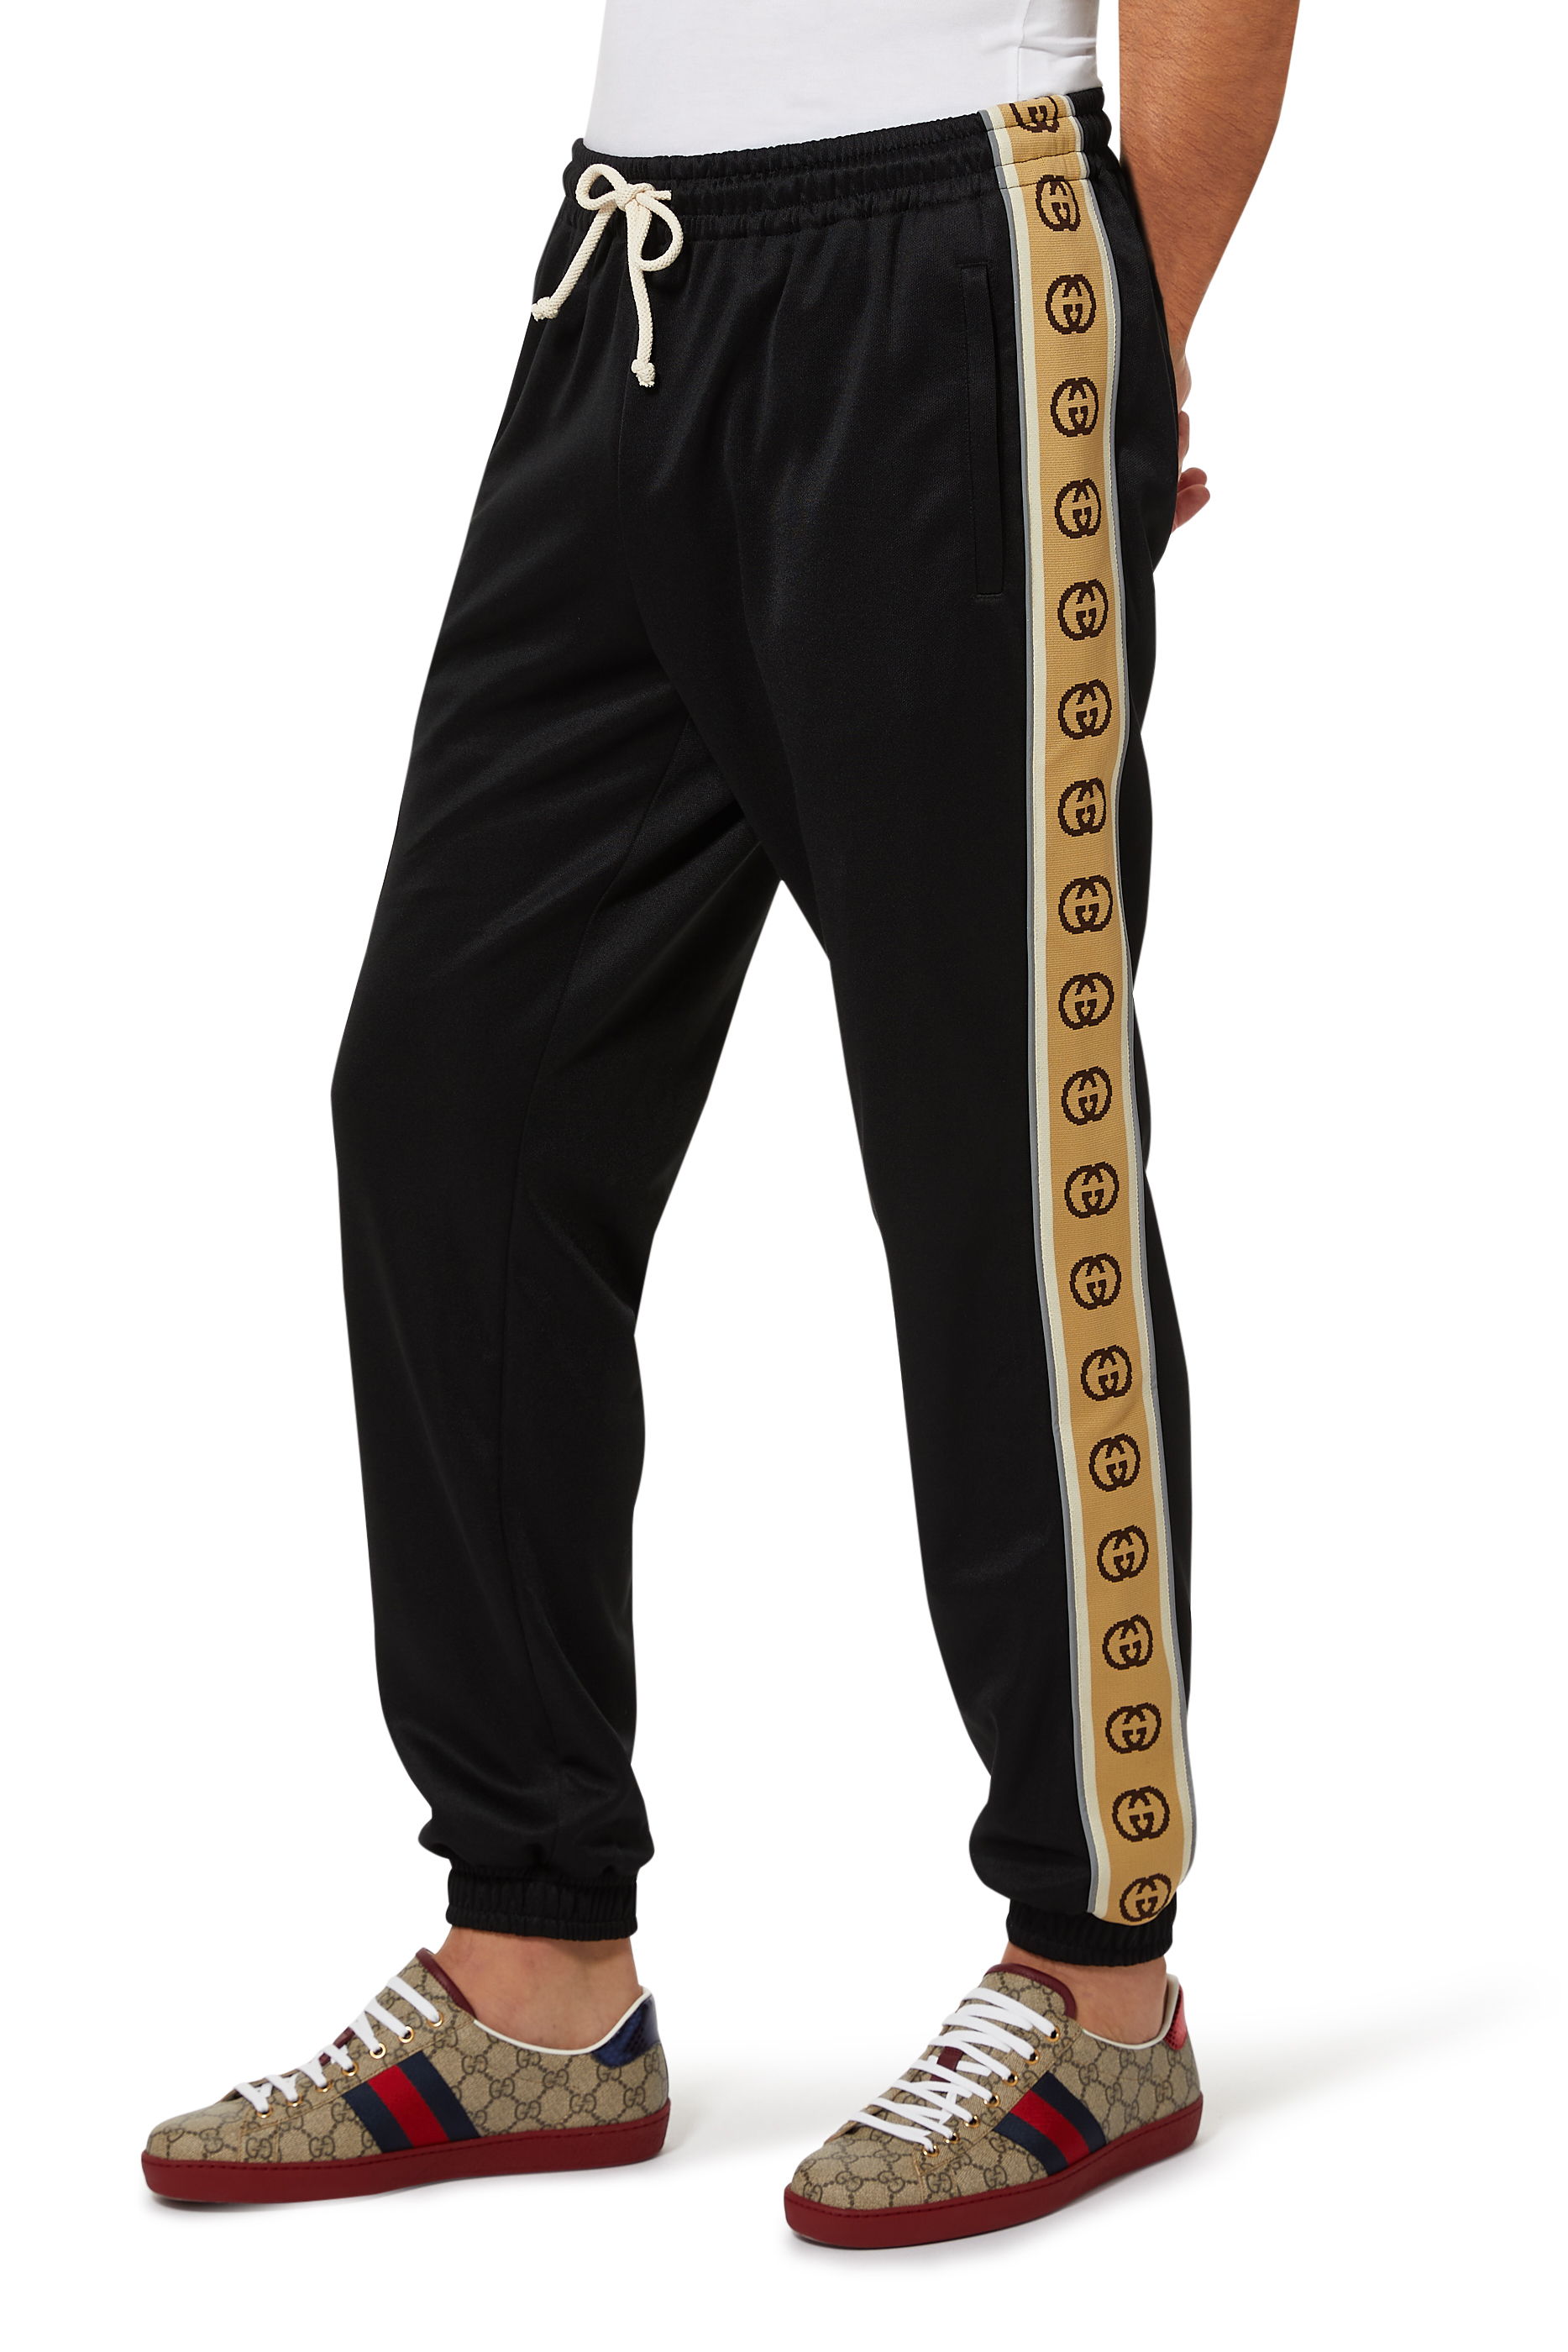 Buy Gucci Interlocking GG Technical Jogging Pants Mens for AED Trousers | Bloomingdale's UAE